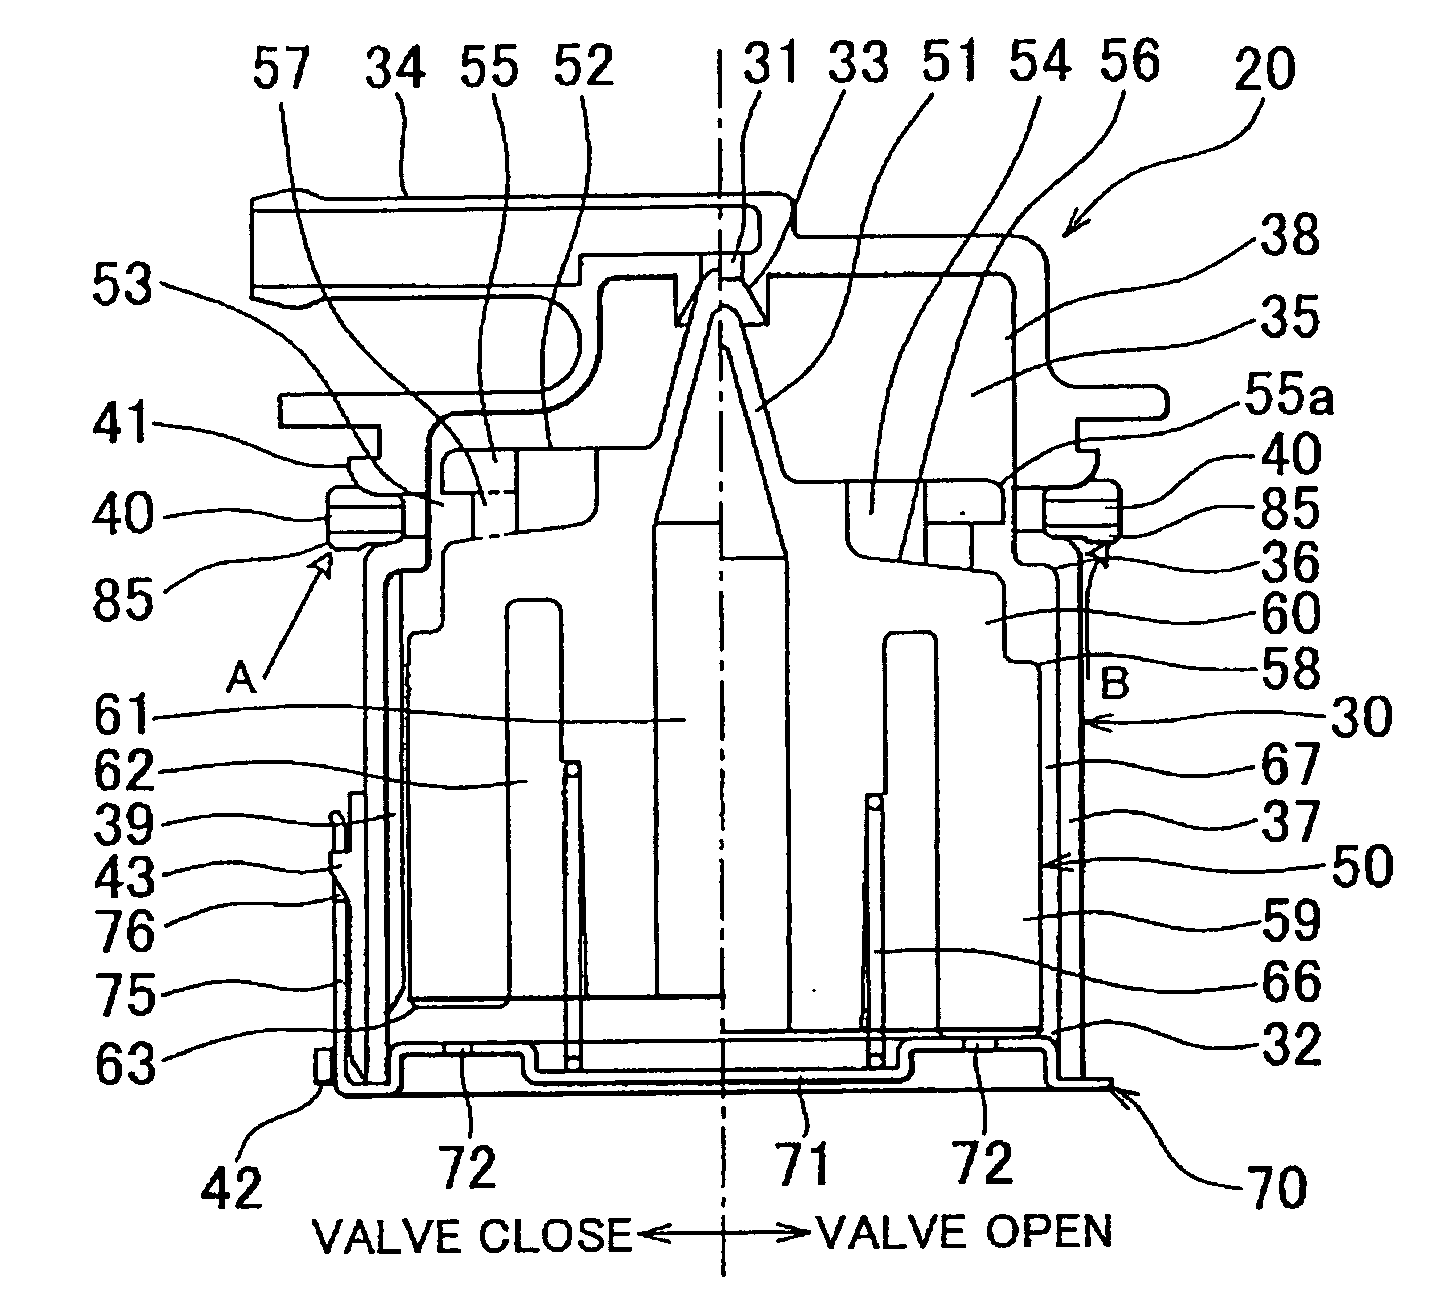 Fuel-outflow check valve